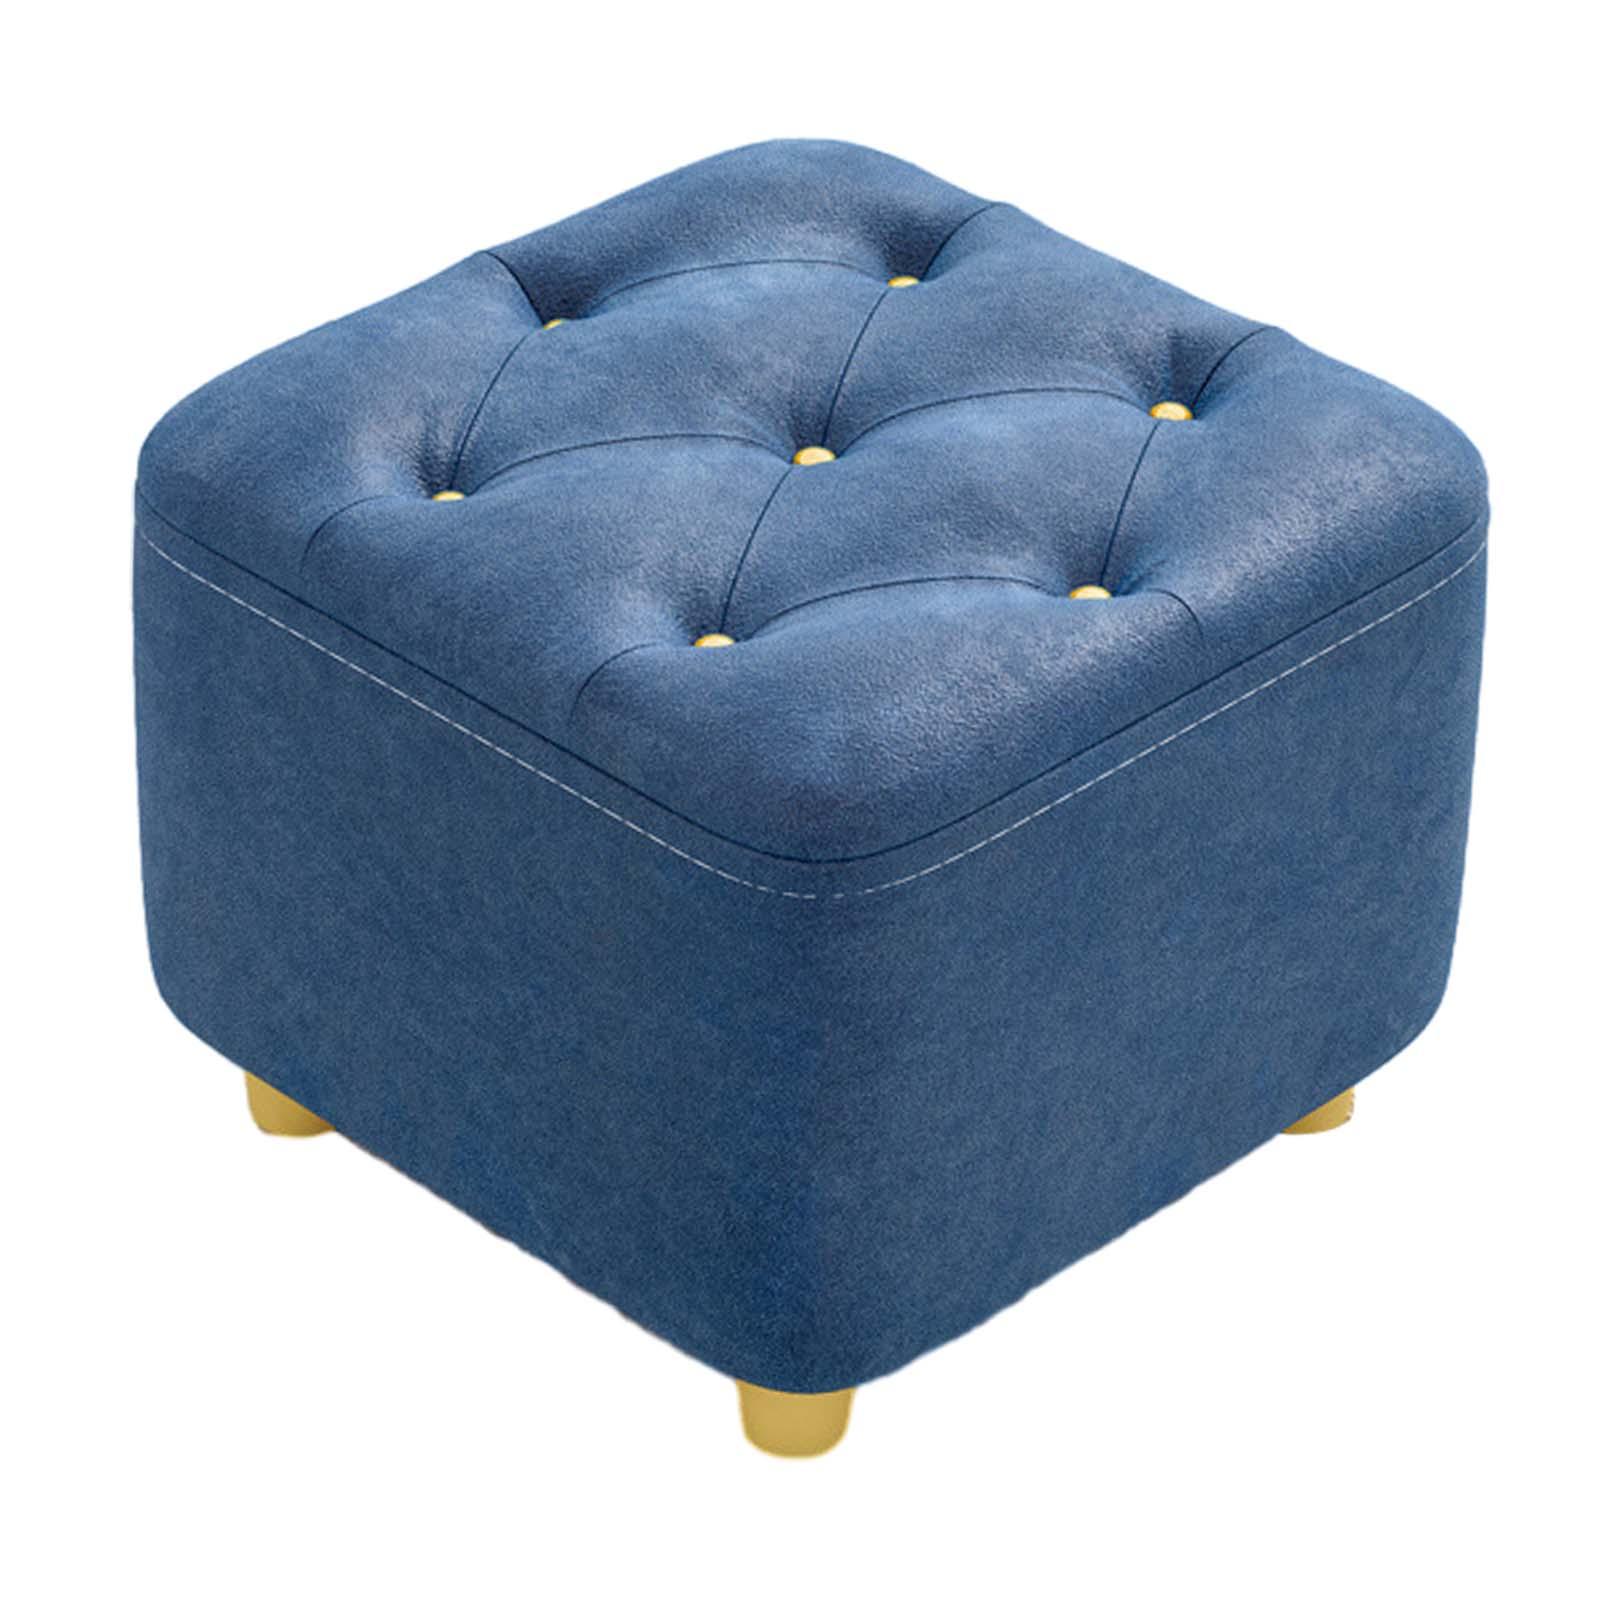 Square Footstool Foot Stool Comfortable Stepstool Creative Ottoman Stool Footrest for Living Room Dressing Room Bedroom Couch dark blue - image 2 of 8